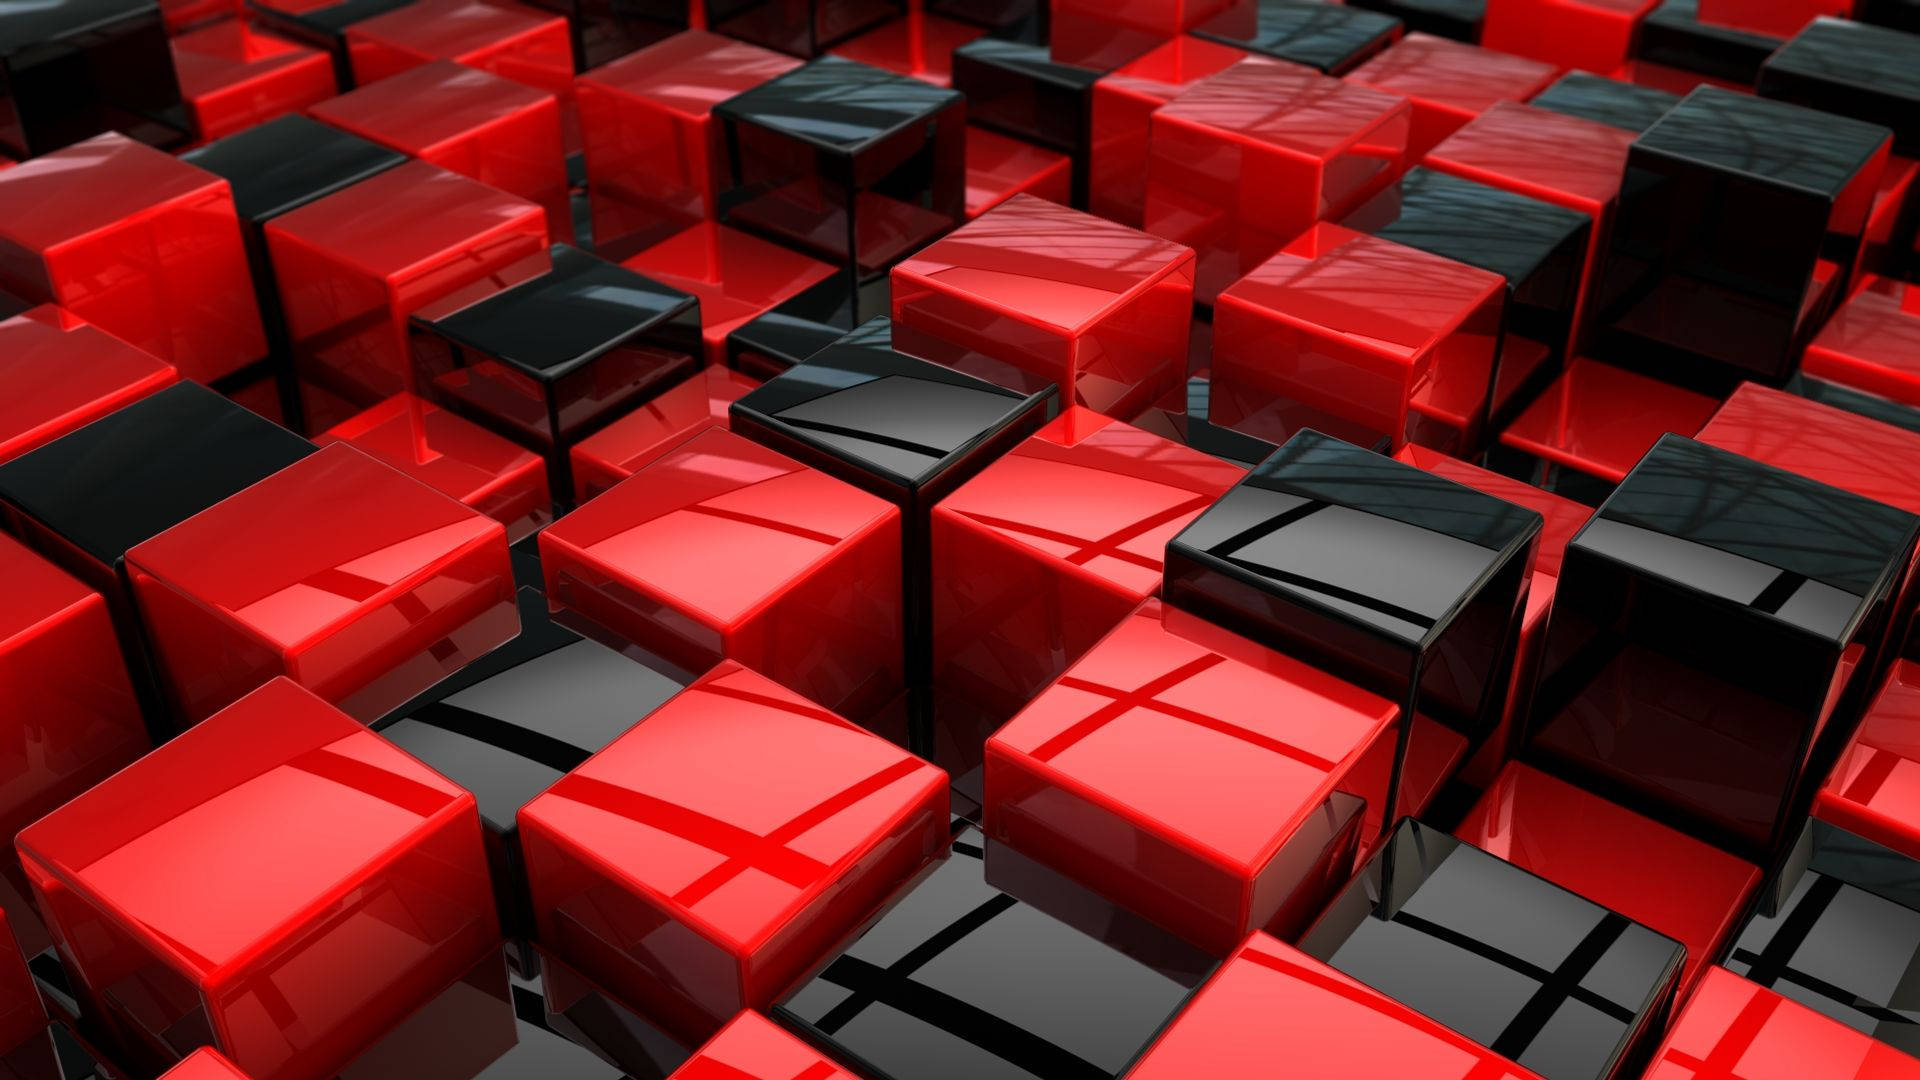 3D black and red cubes wallpaper.